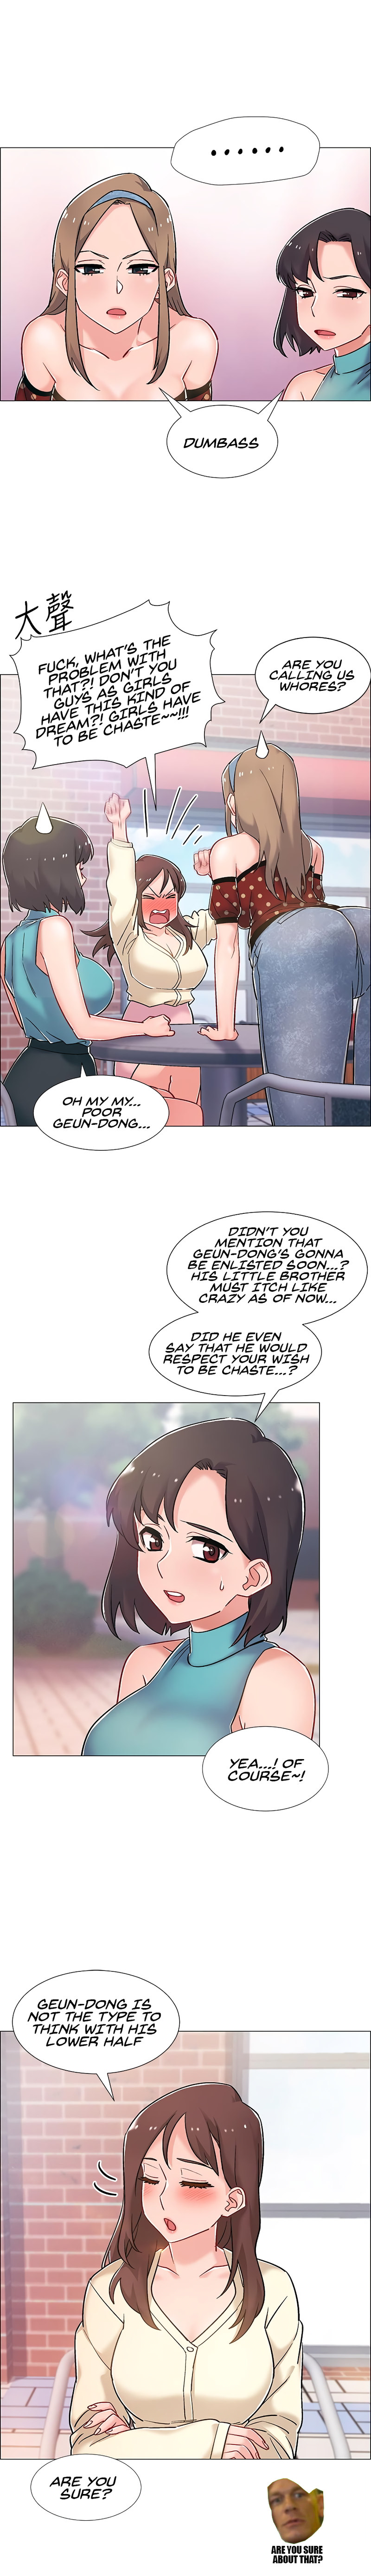 Enlistment Countdown - Chapter 10 Page 21